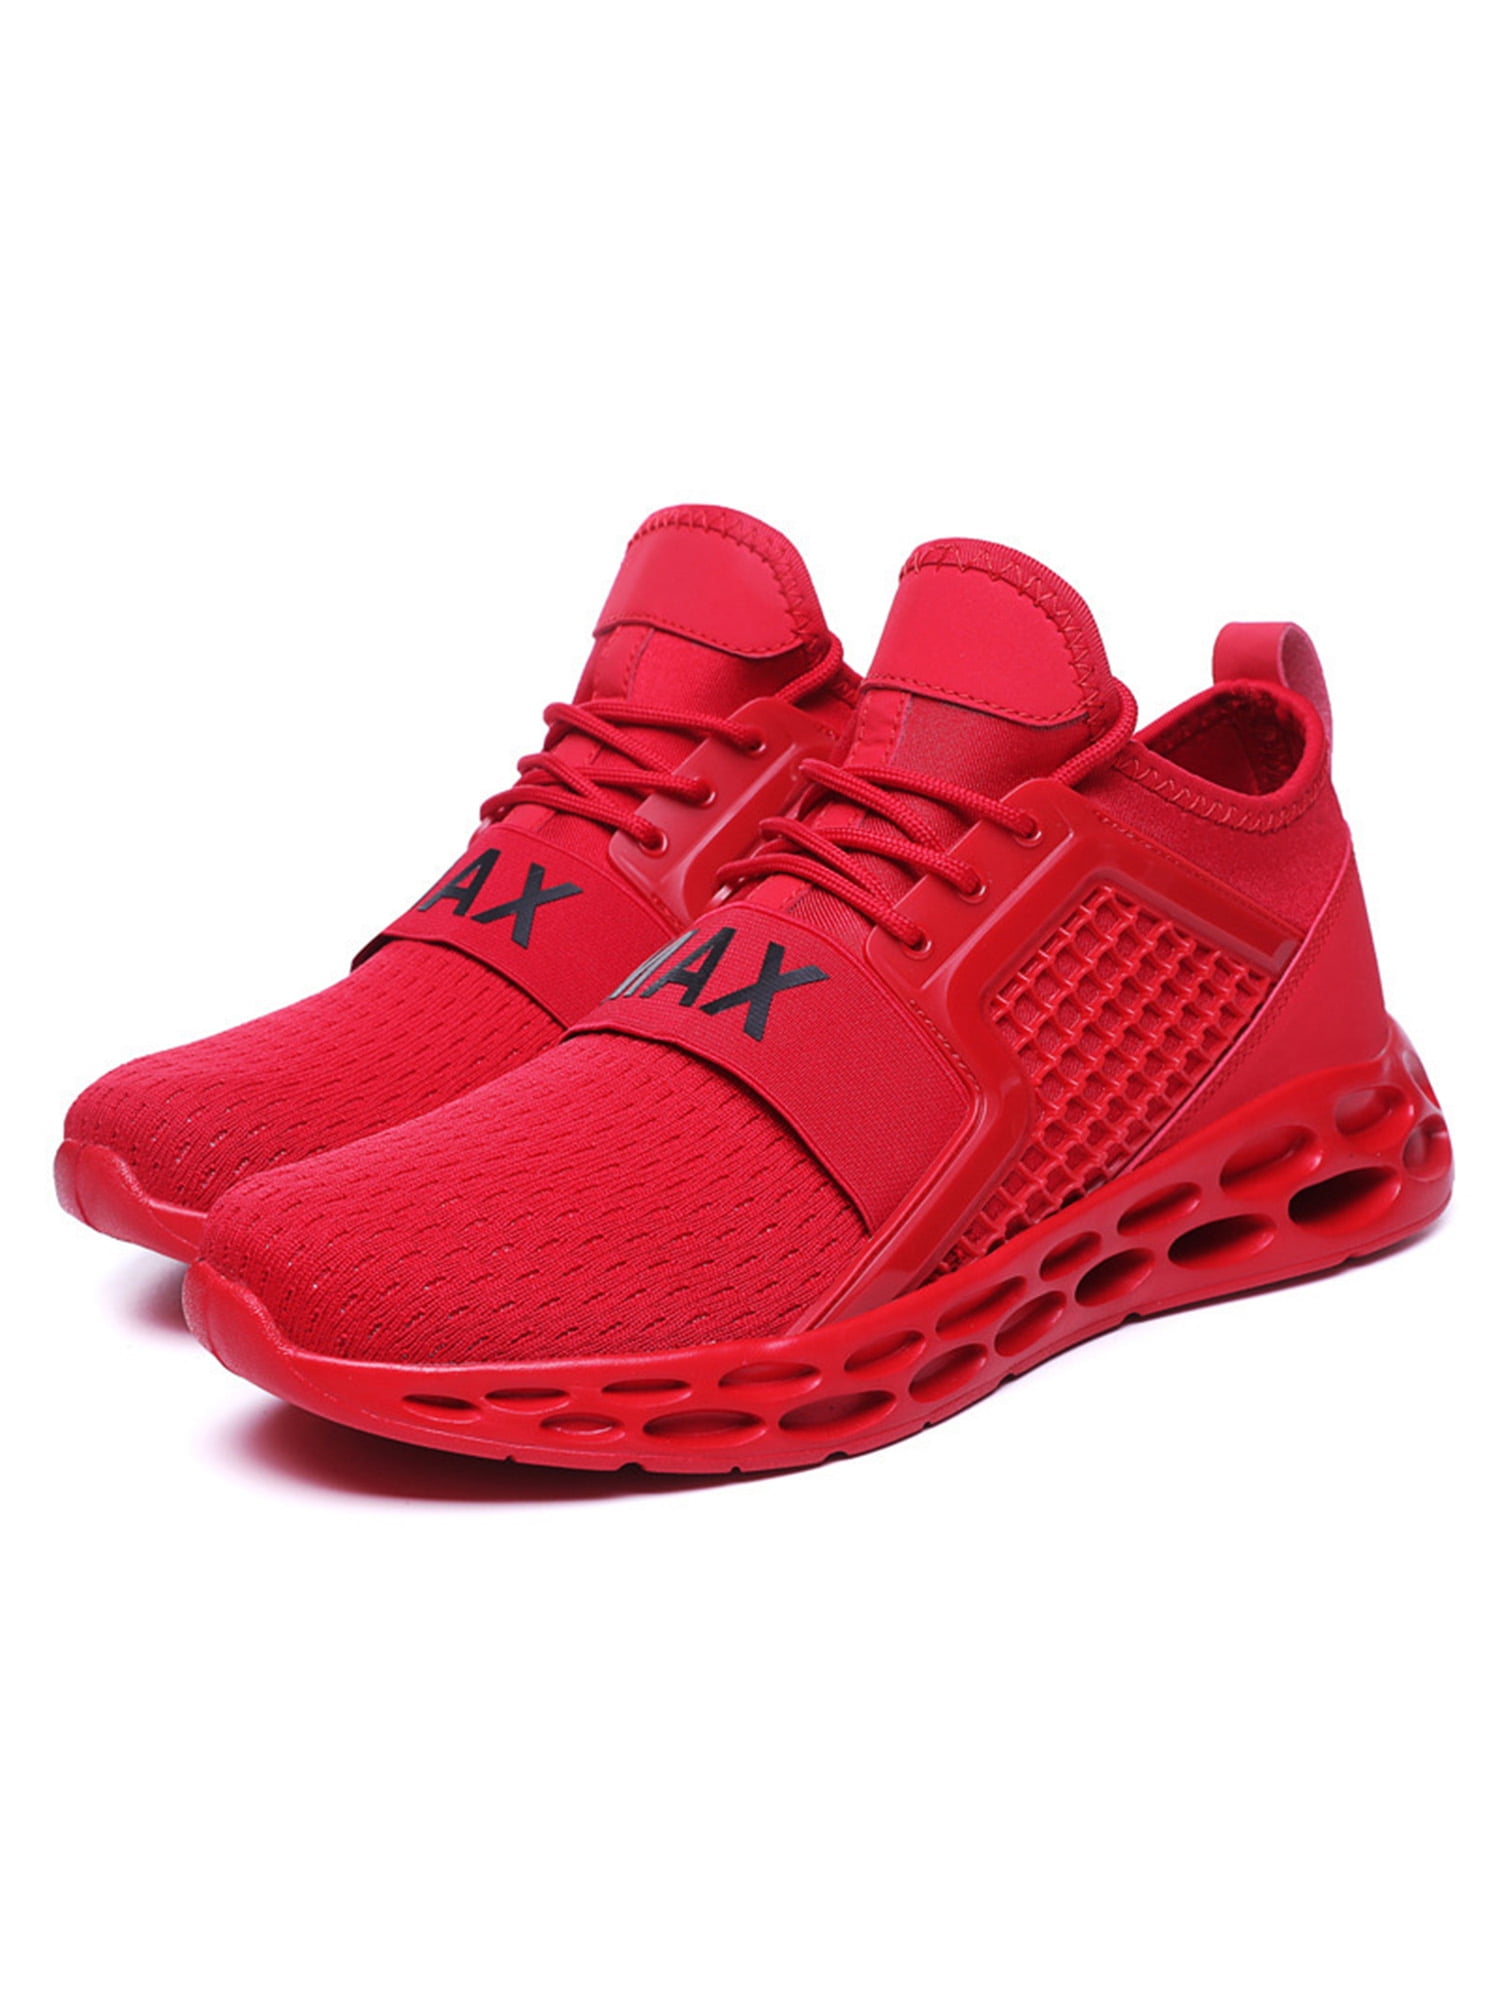 High Quality LV Branded Casual Running Shoes Fashion Sports Men